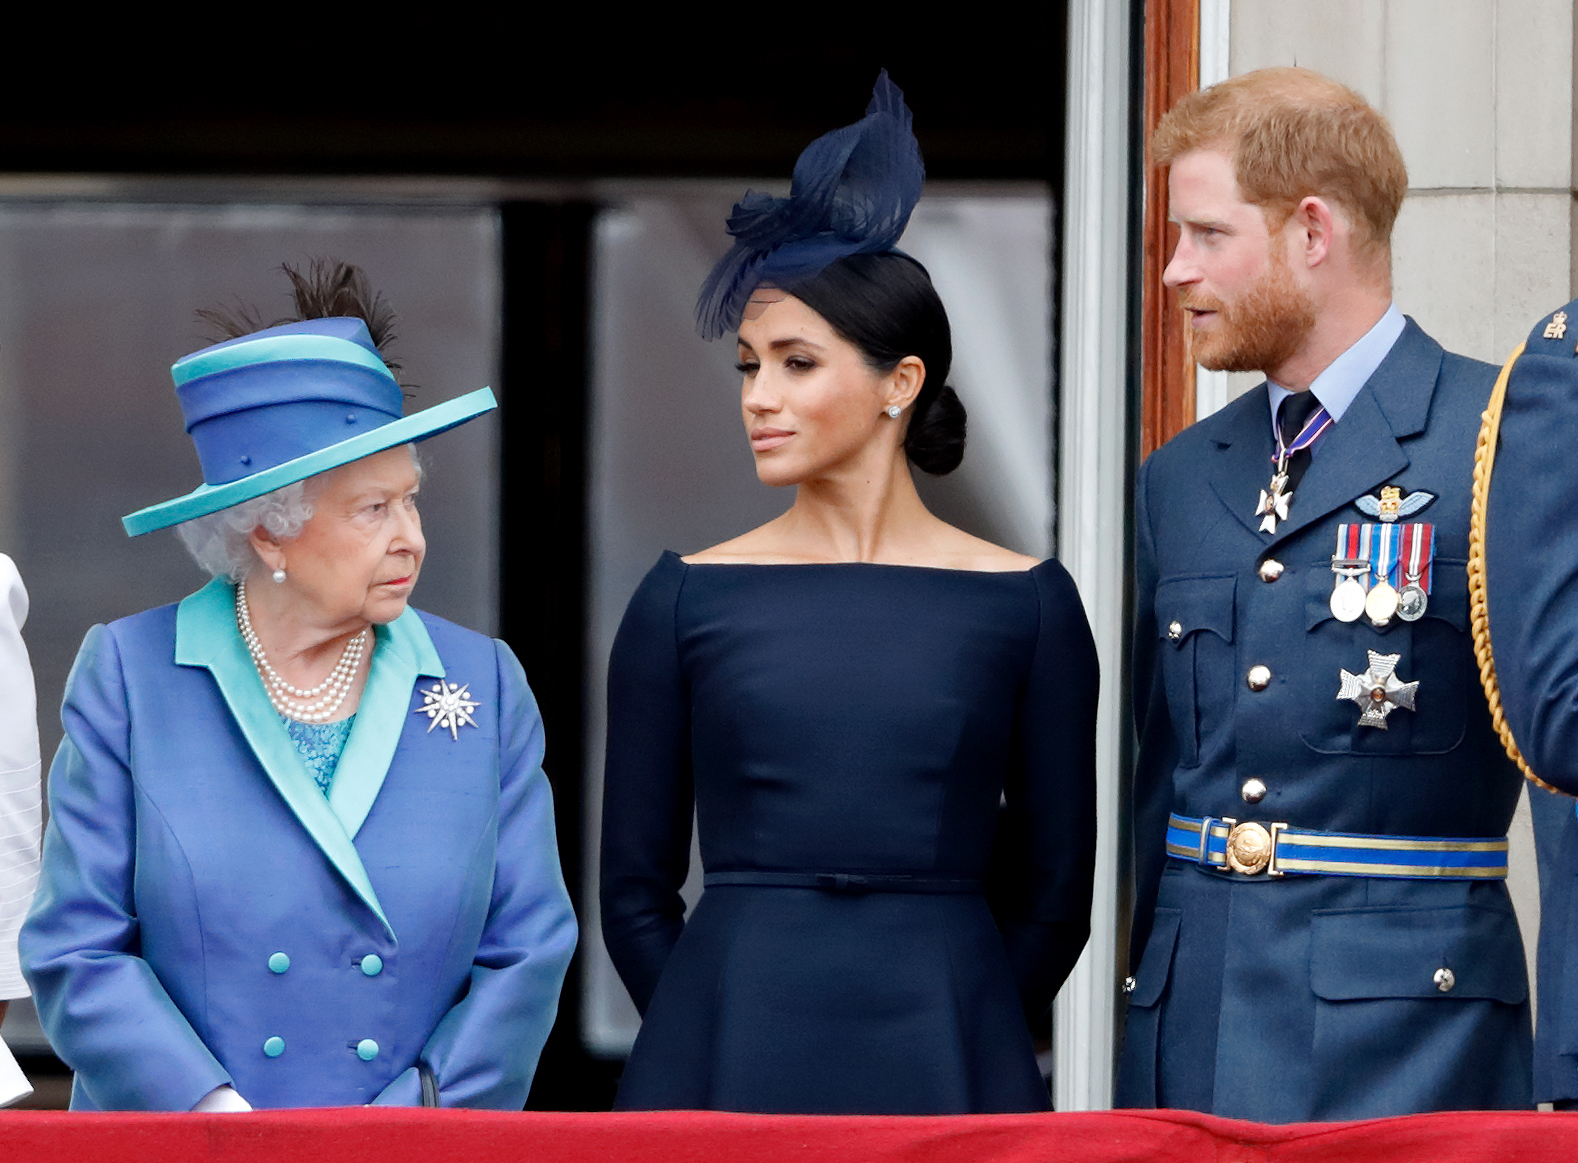 Queen Elizabeth, Meghan Markle, and Prince Harry watch a flypast to mark the centenary of the Royal Air Force from the balcony of Buckingham Palace on July 10, 2018 in London, England | Source: Getty Images